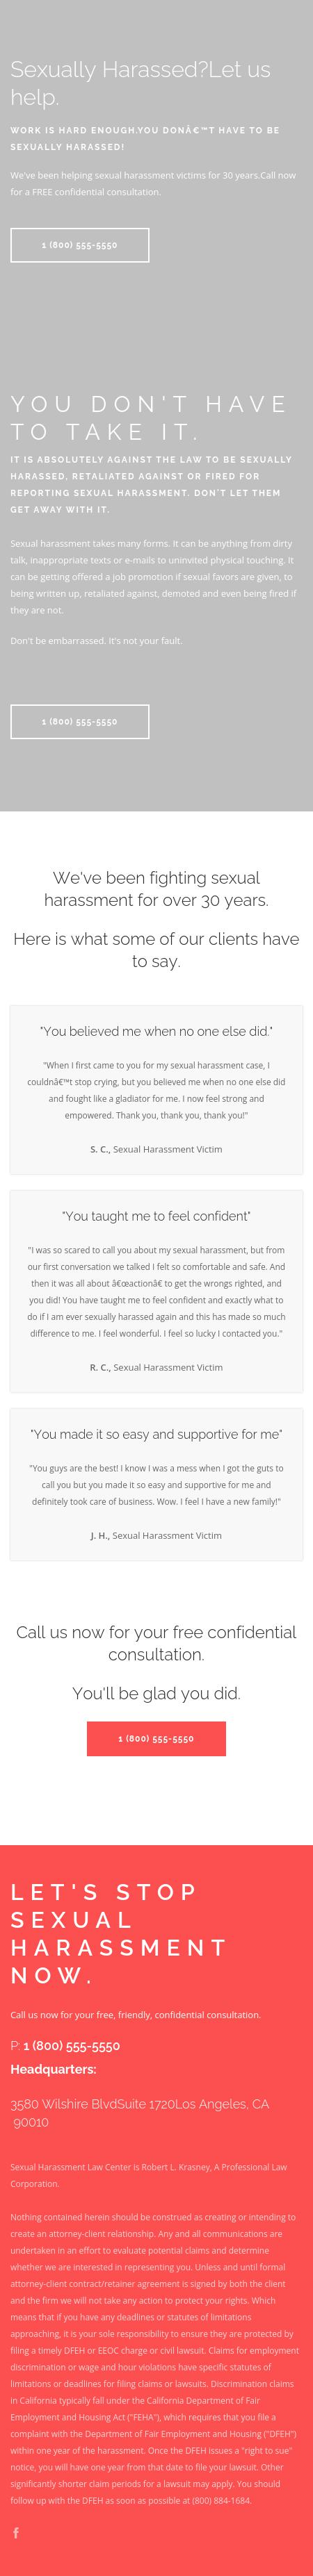 Sexual Harassment Law Center - Los Angeles CA Lawyers